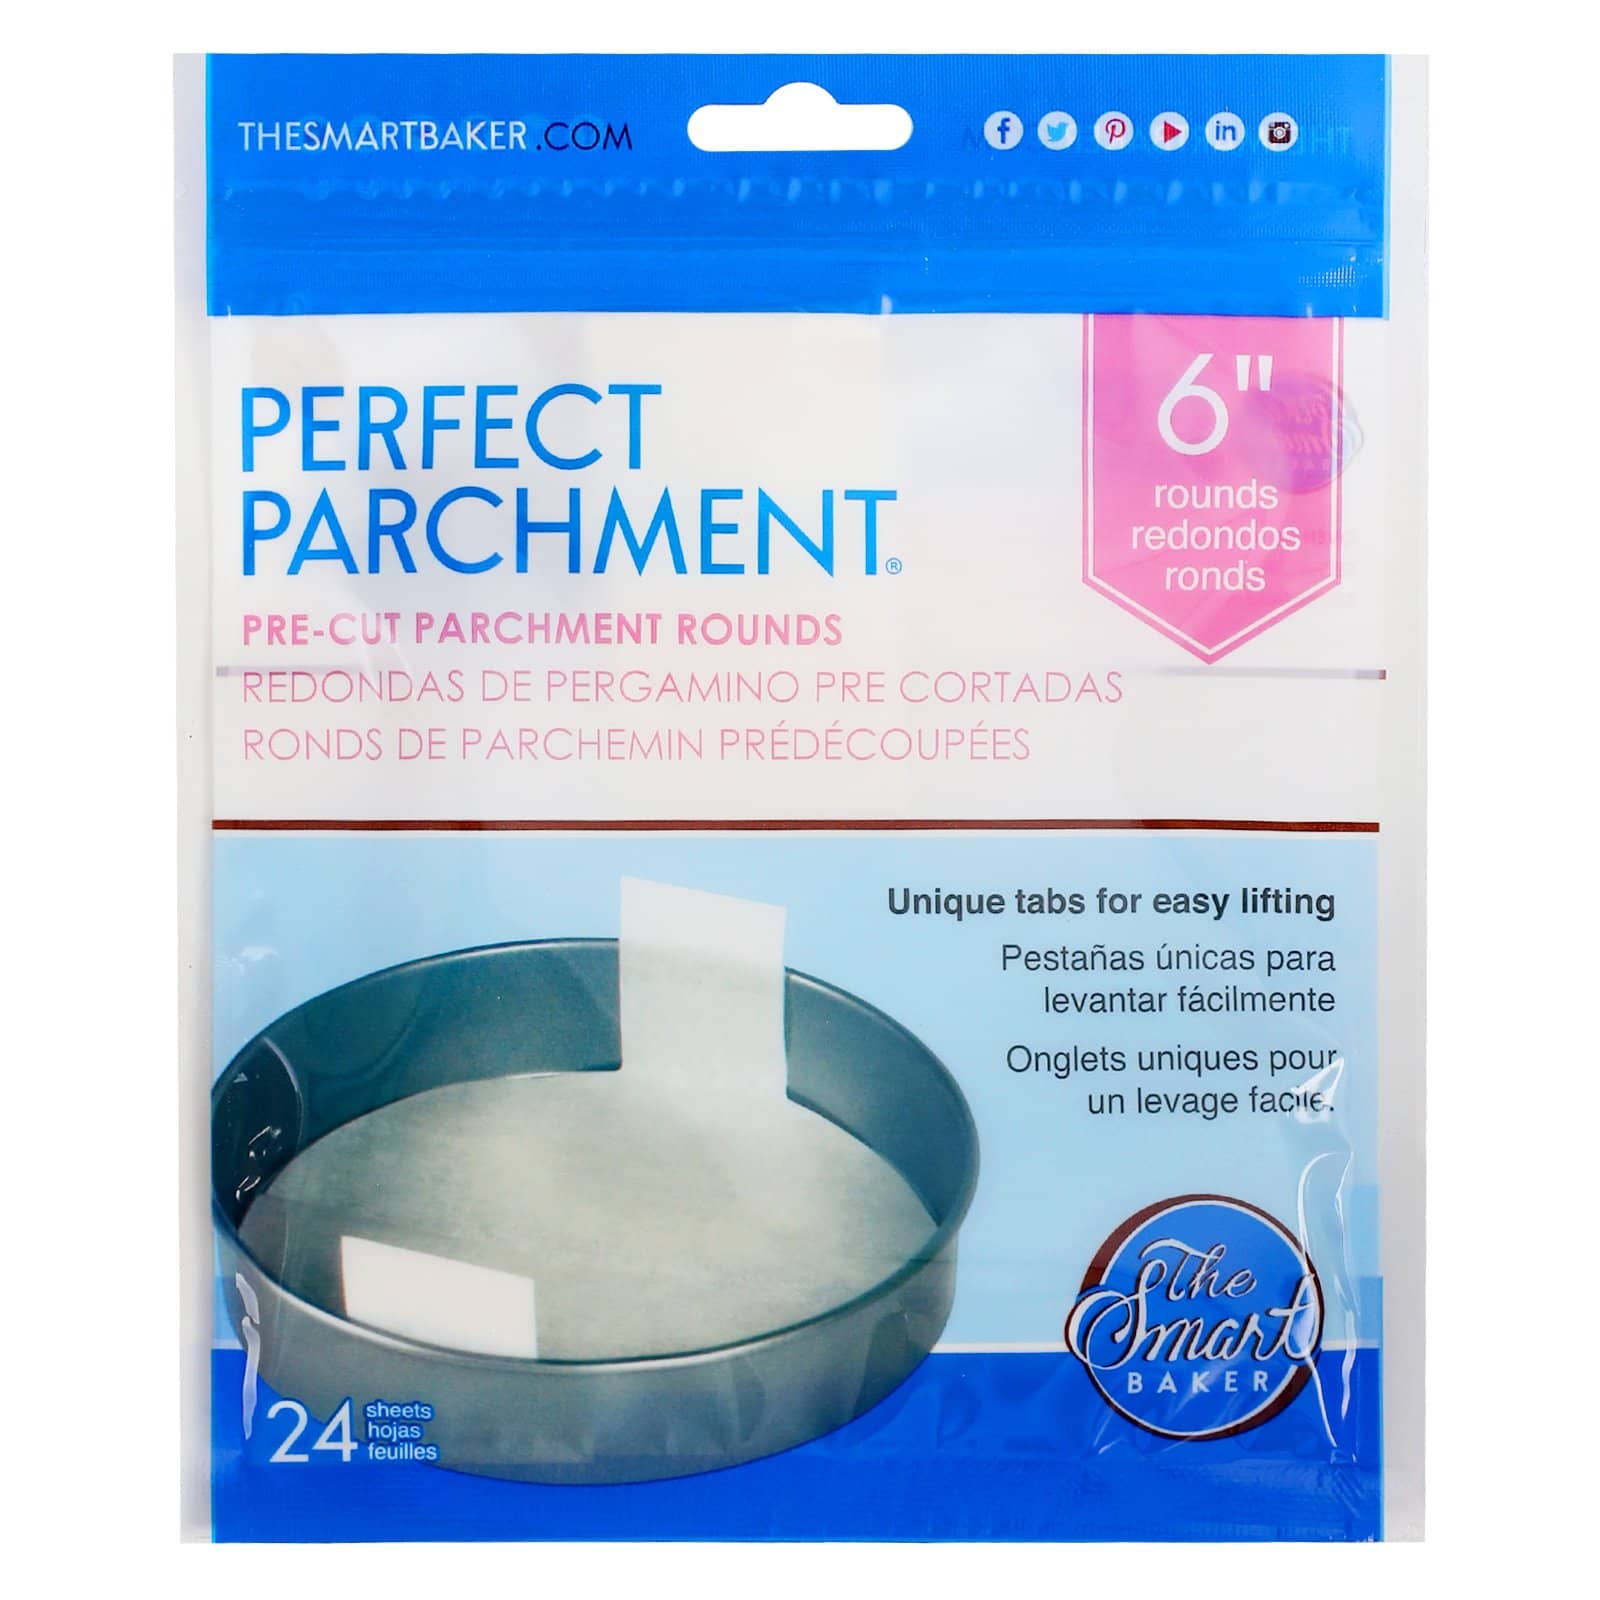 6 Inch Cake Pan Unbleached Parchment Paper Sheets 120 Pack